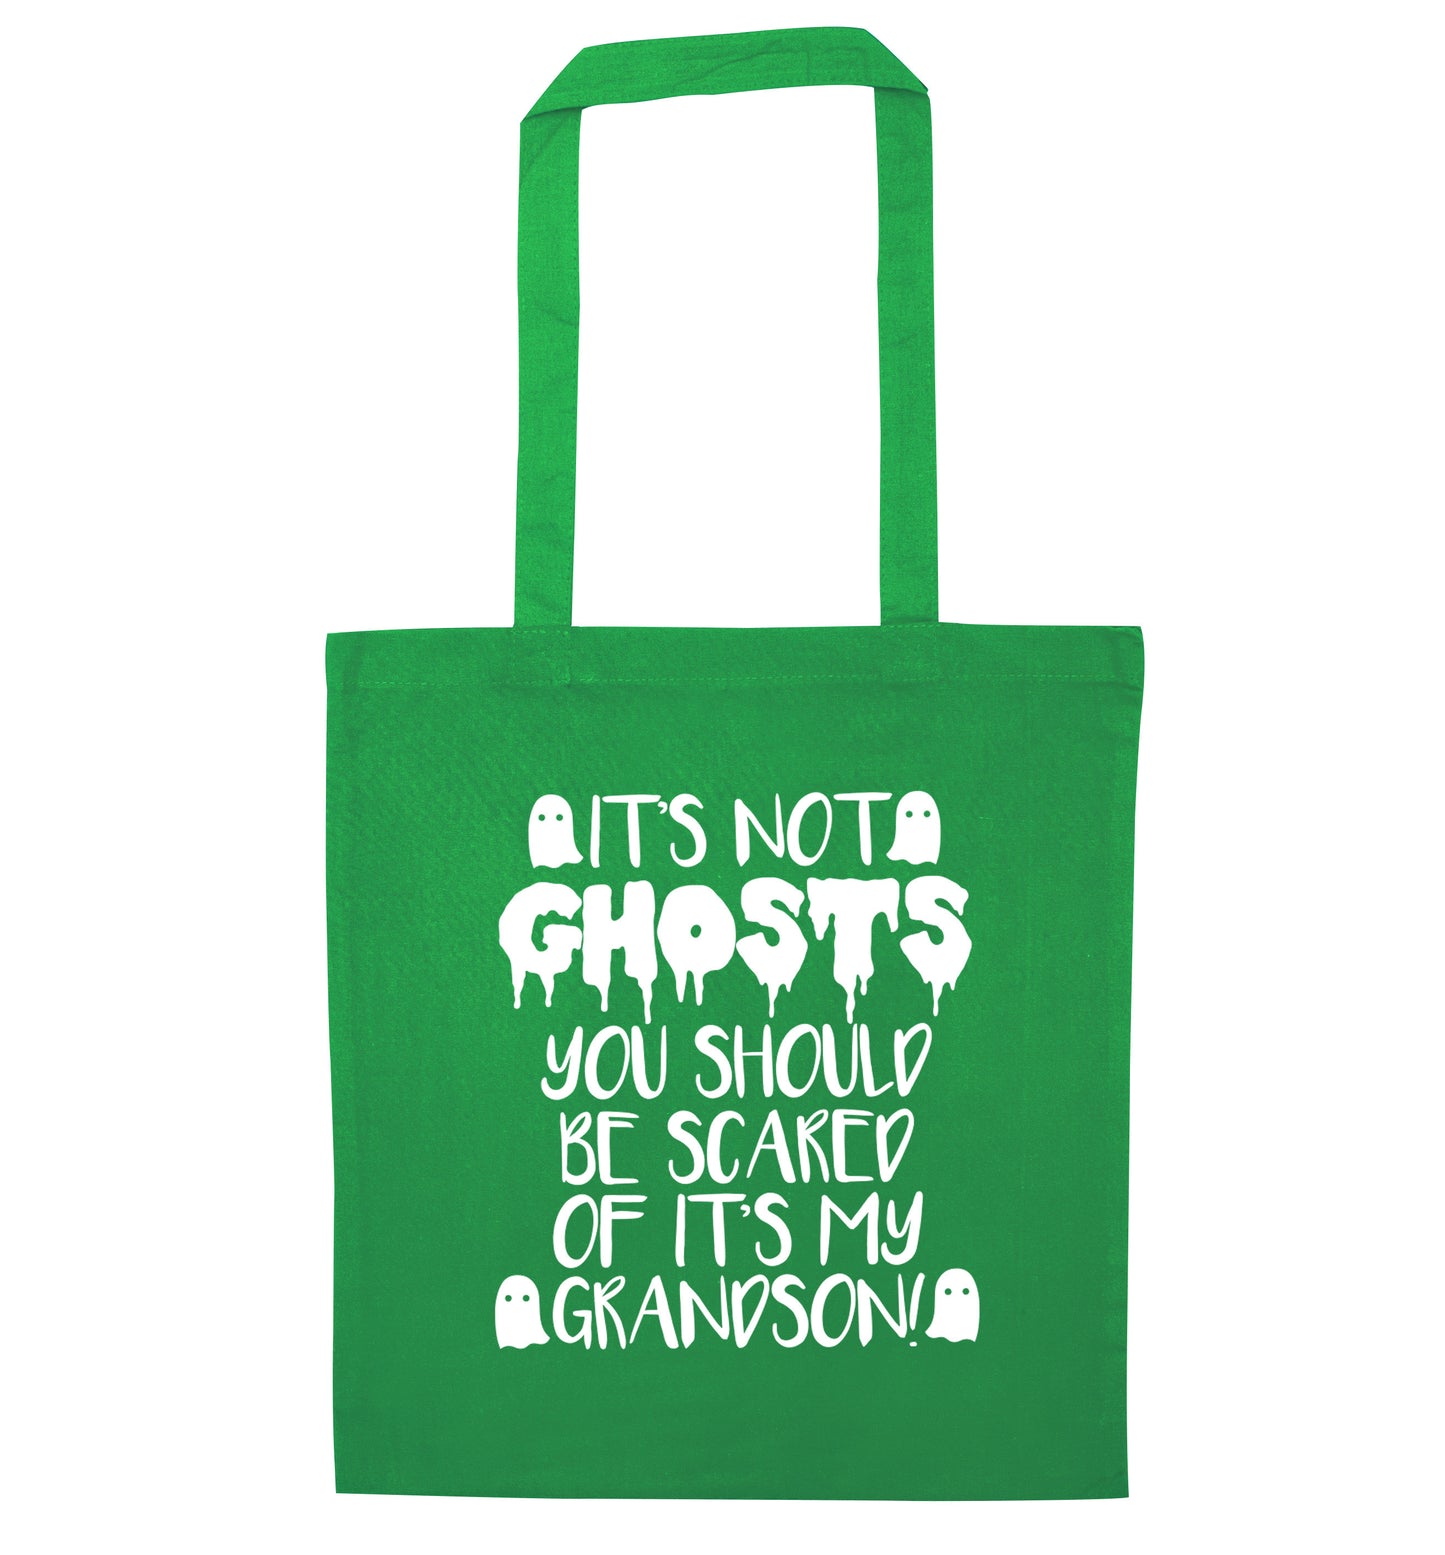 It's not ghosts you should be scared of it's my grandson! green tote bag